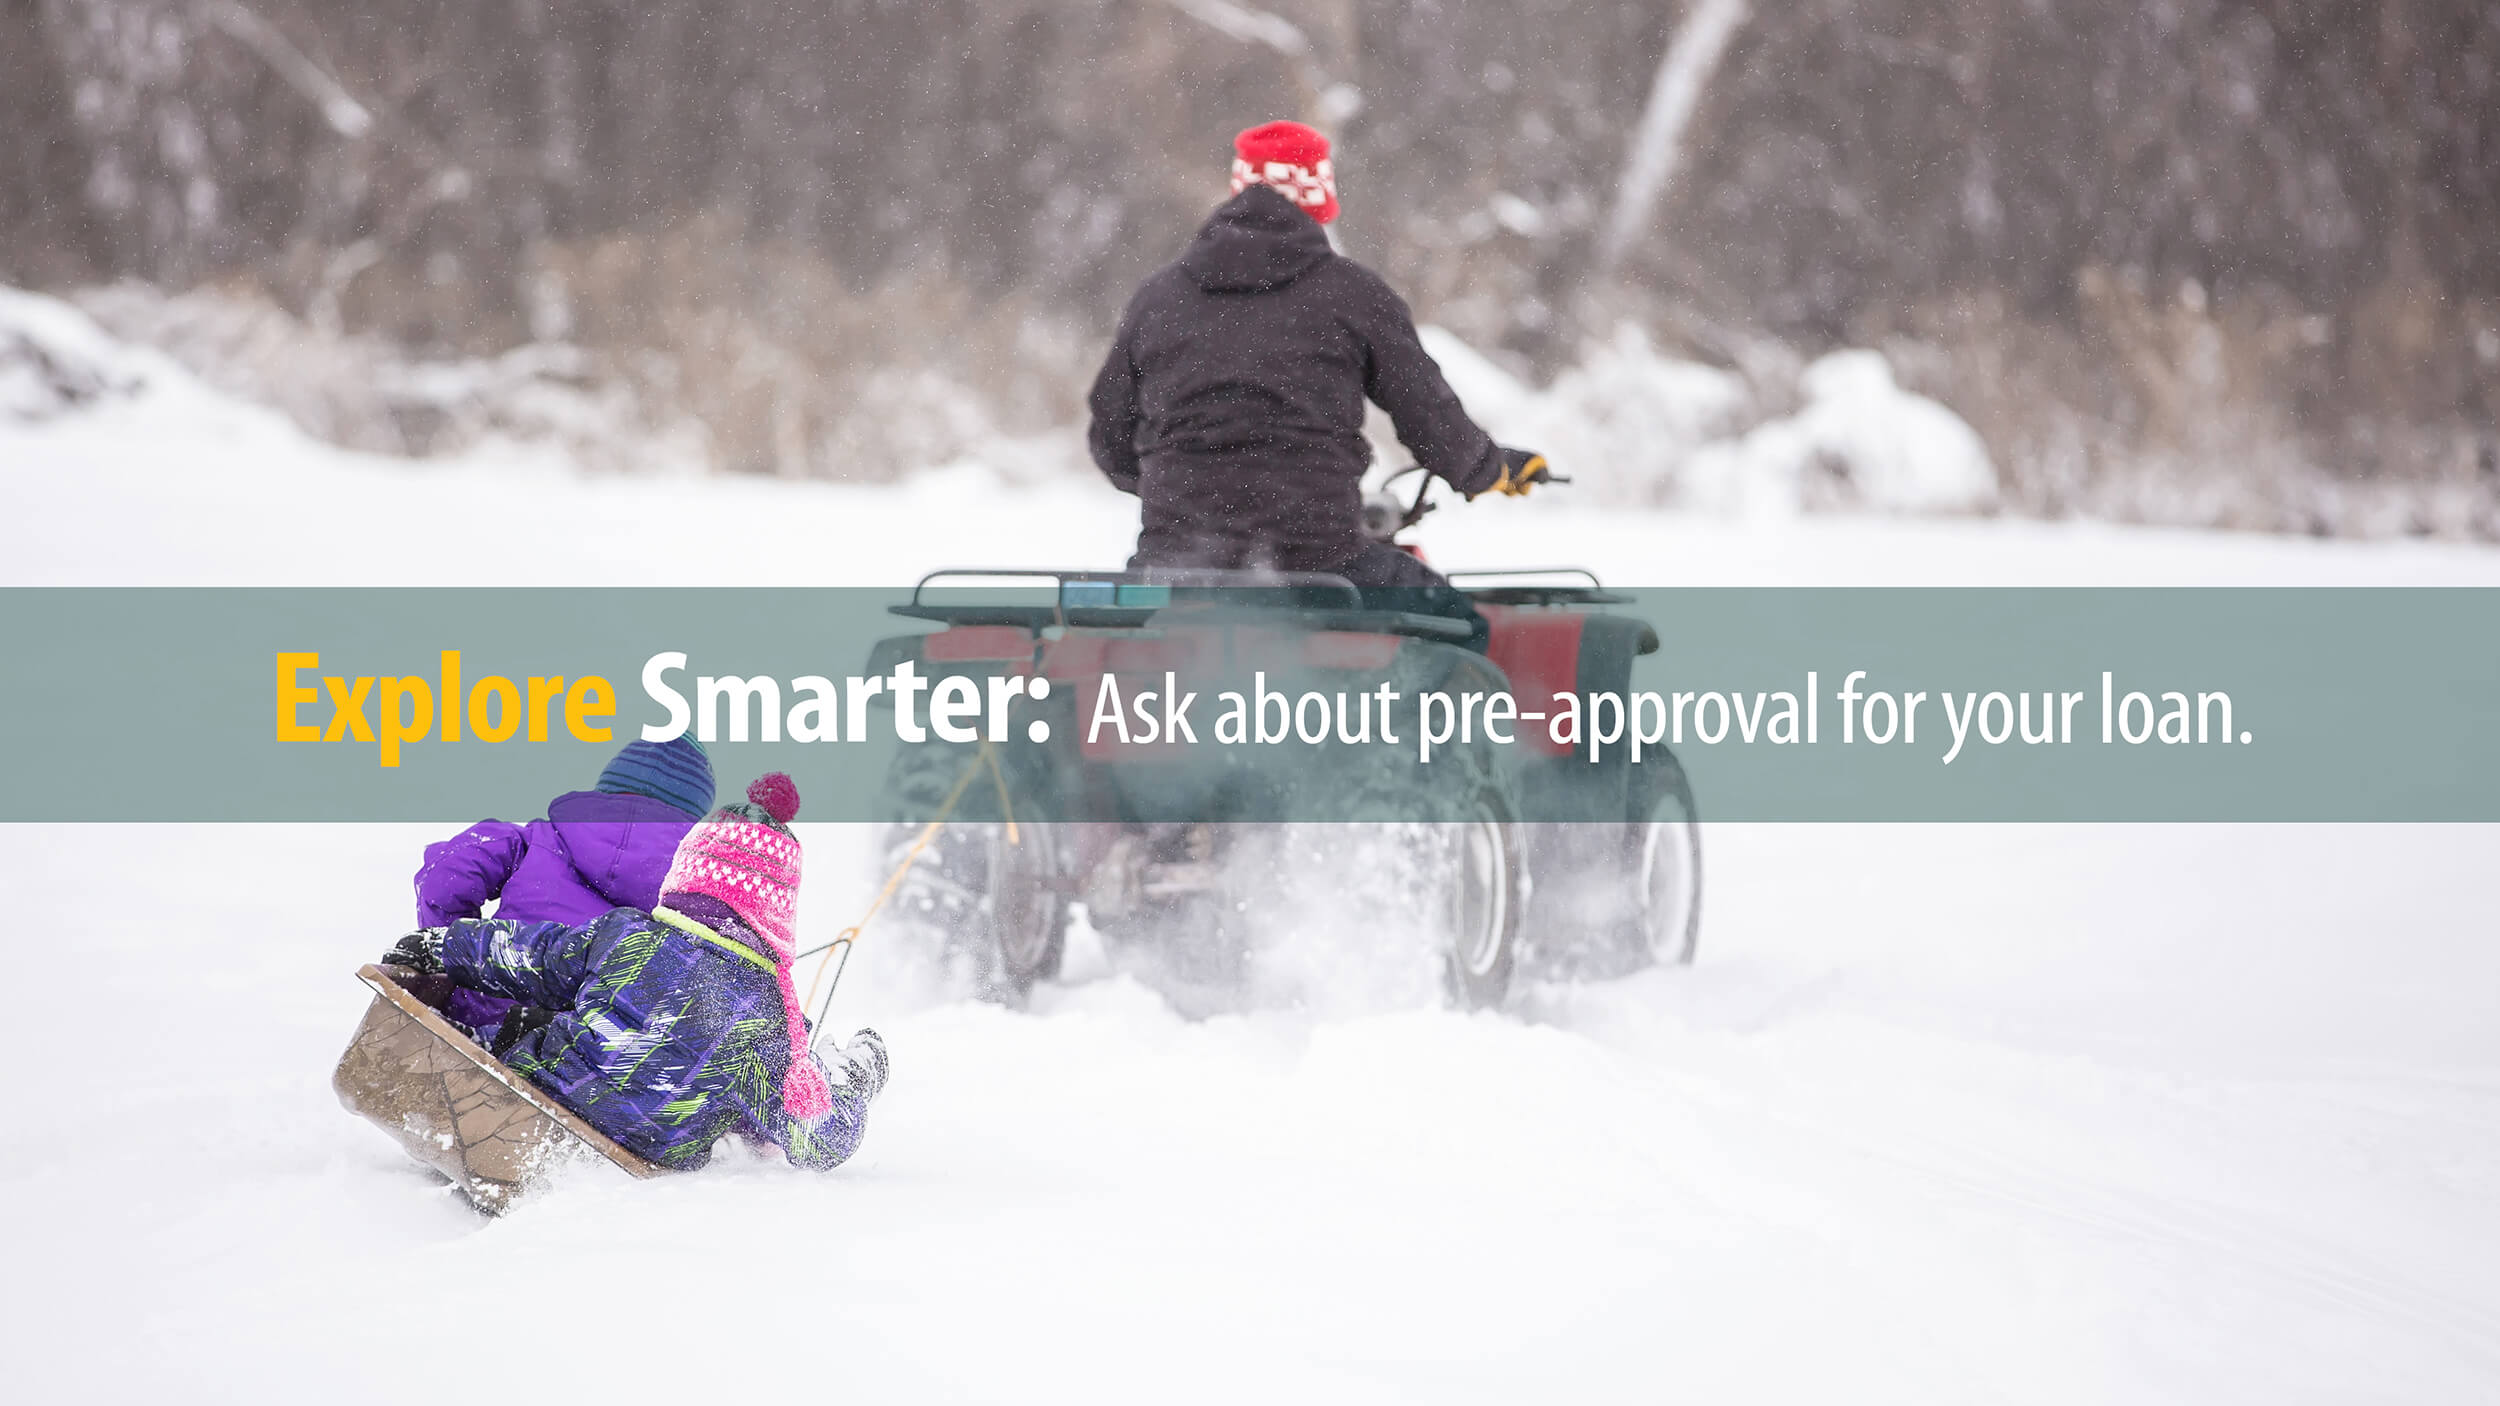 Adult on 4-wheeler purchased with First Source financing tows kids on sled through snow